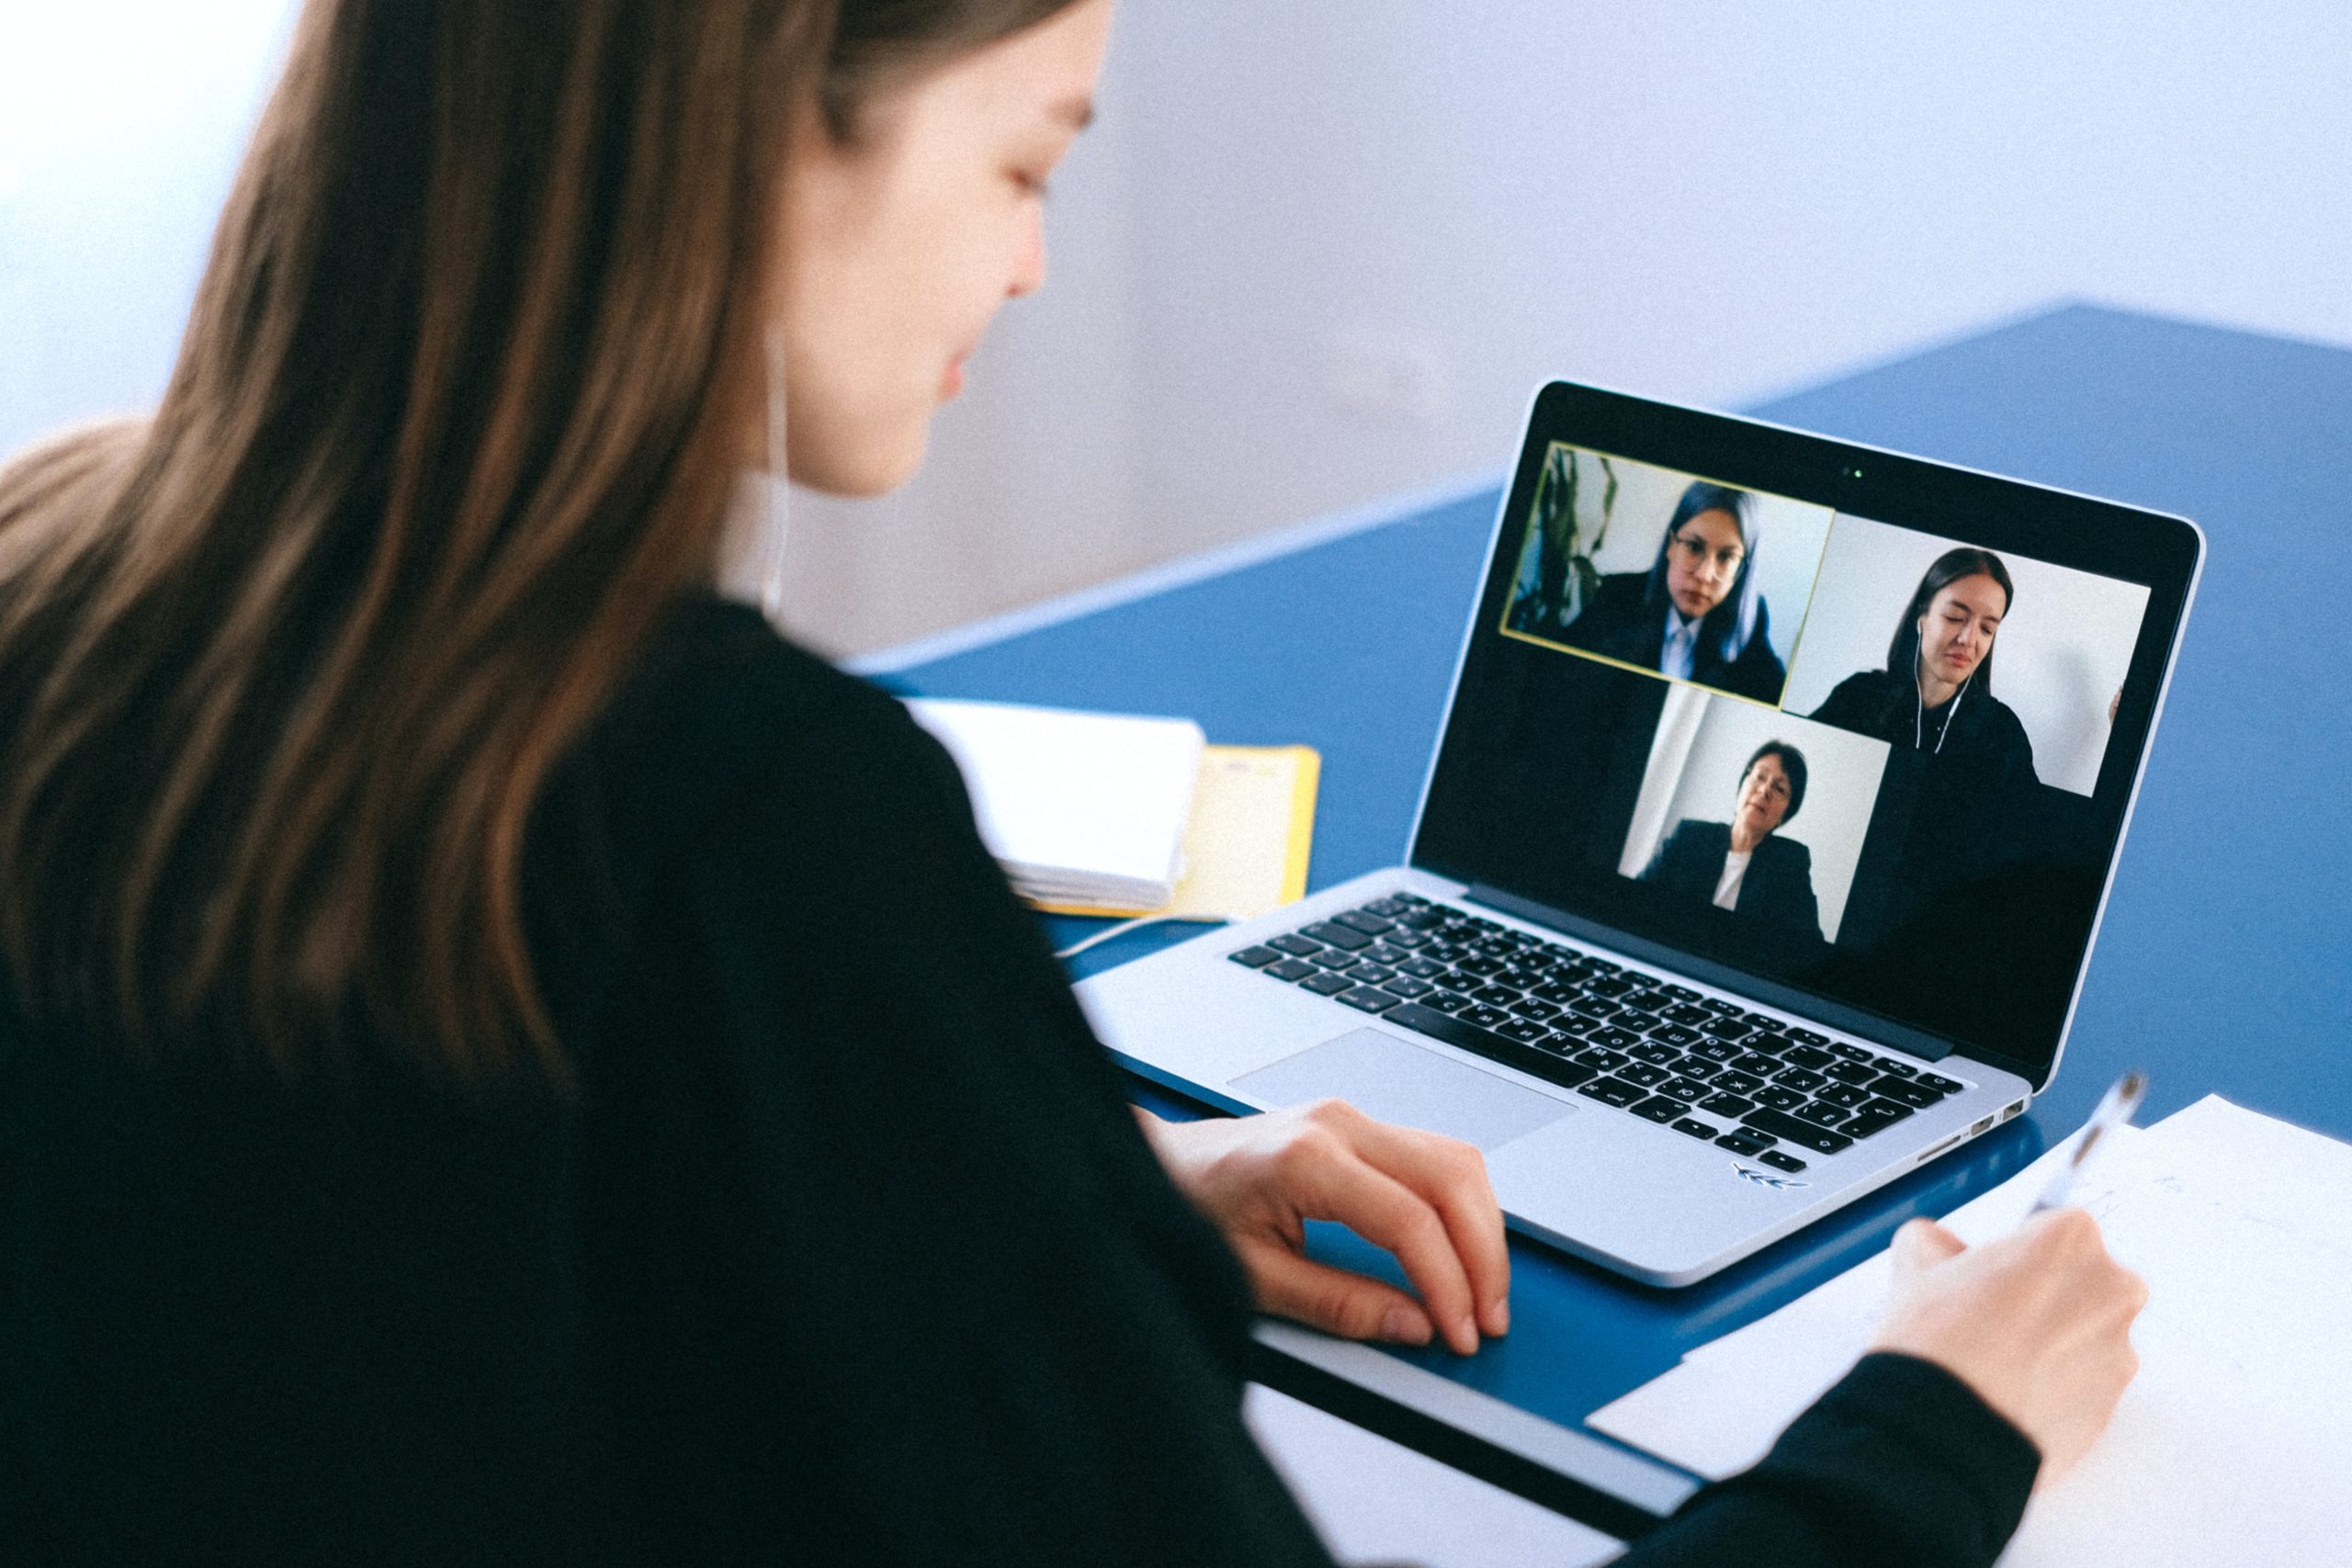 A woman is taking part in a video call with three other people.